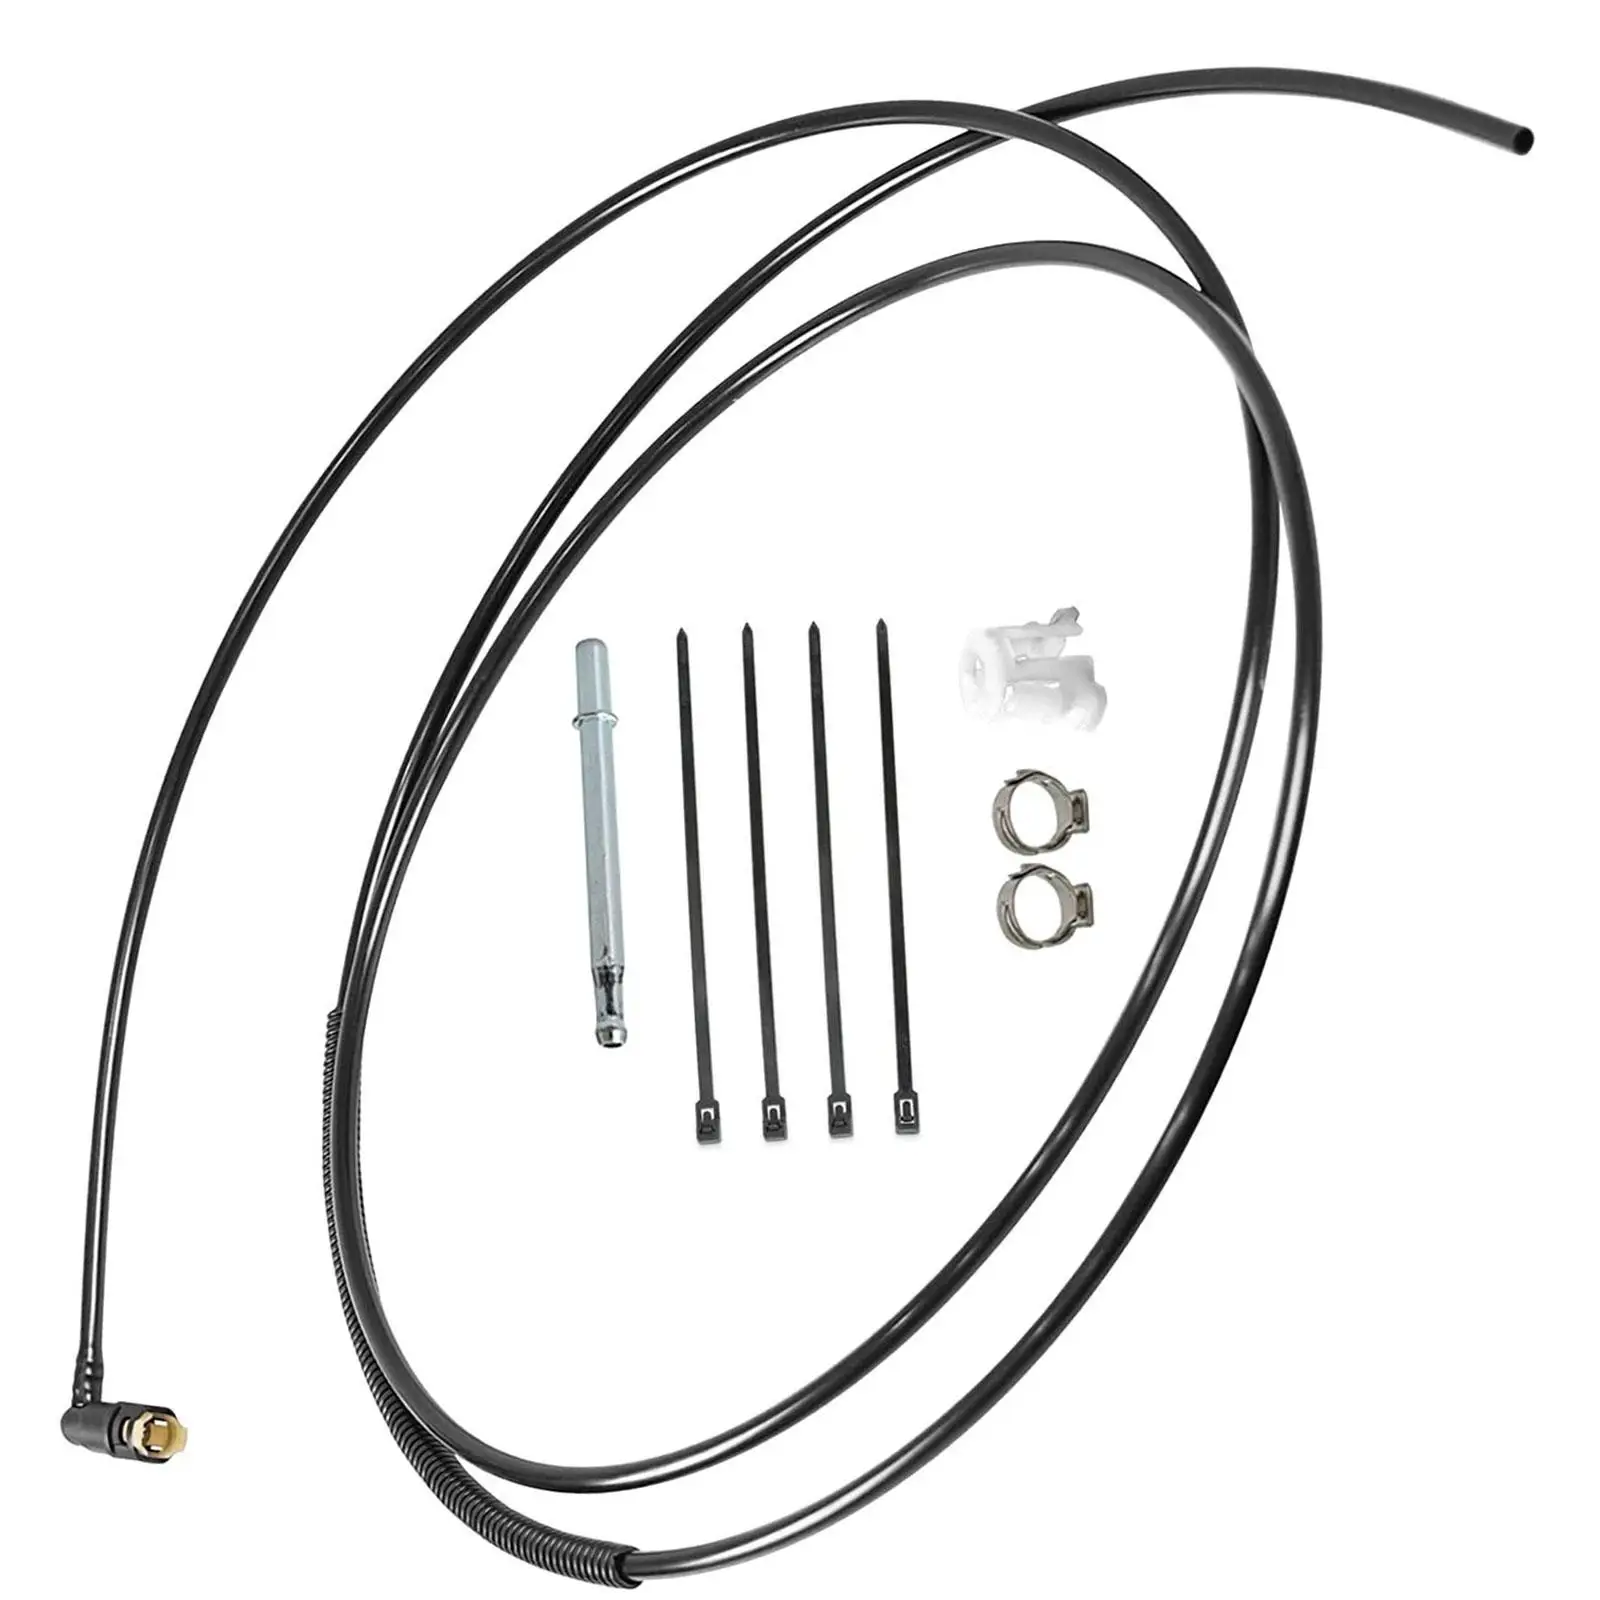 Pick up Gas Fuel Line Fl-Fg0212 Durable Car Accessories High Performance for